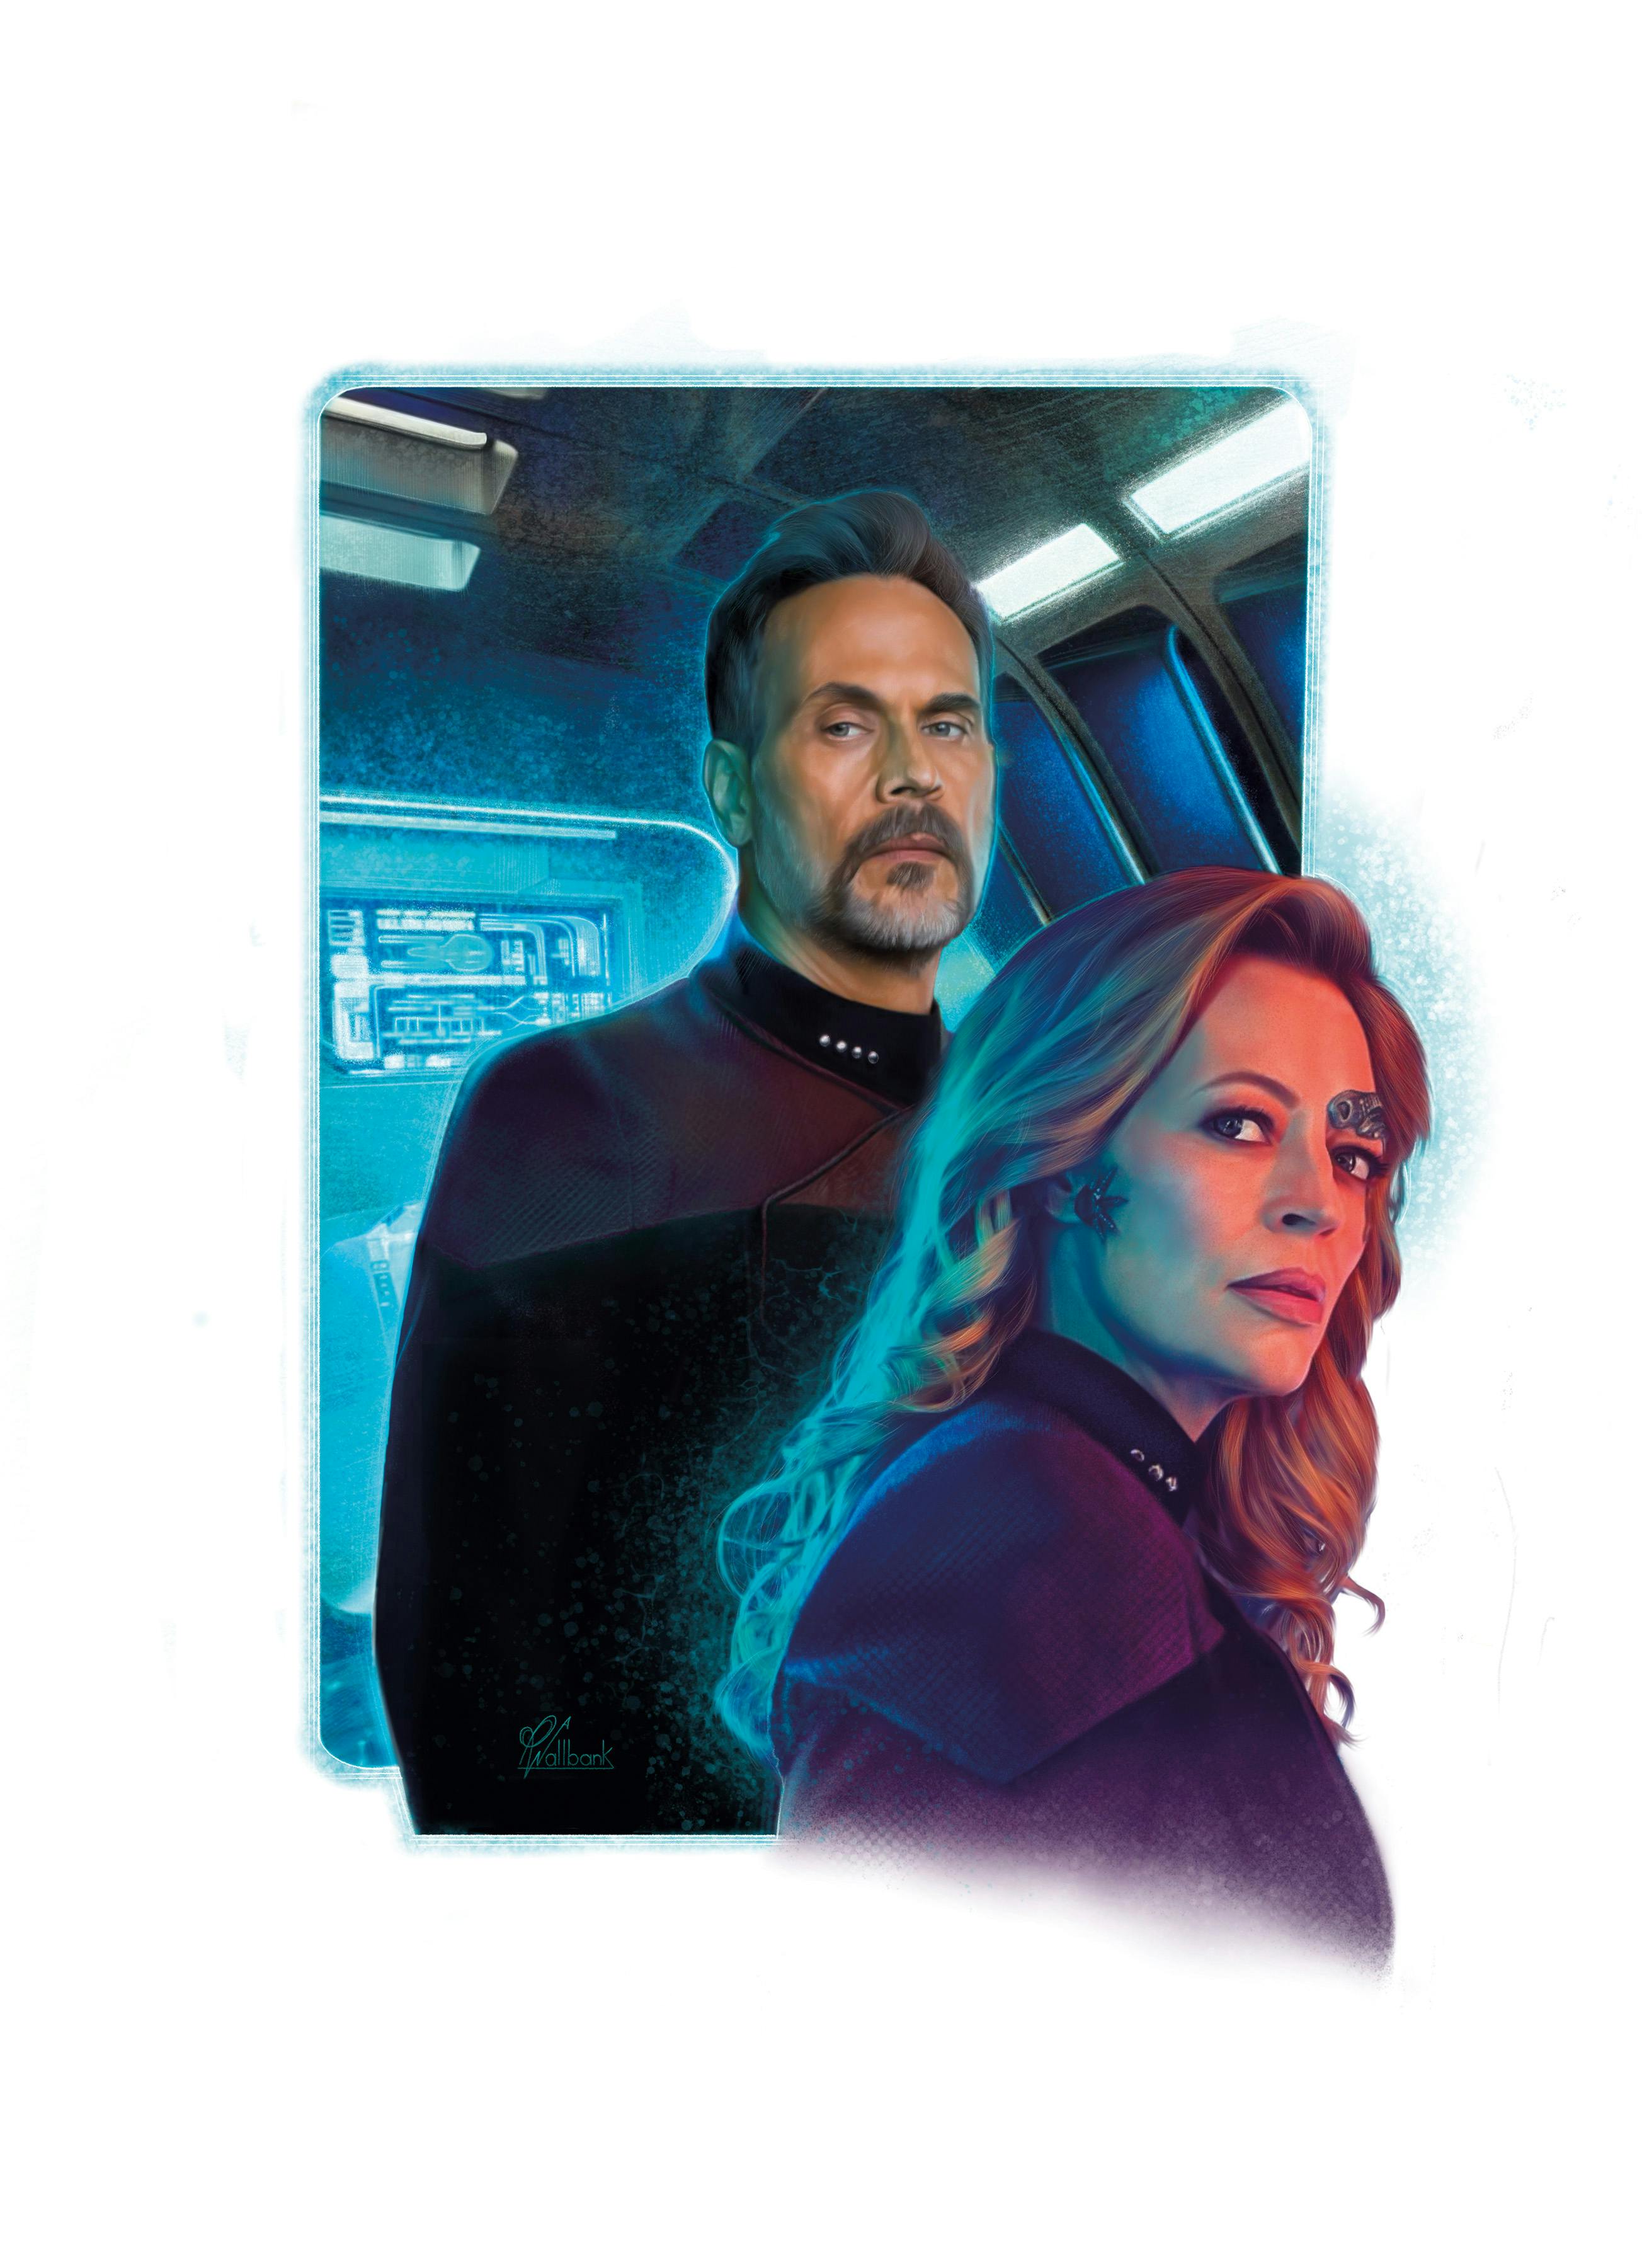 Star Trek Explorer #11 short story accompanying art featuring Liam Shaw and Seven of Nine